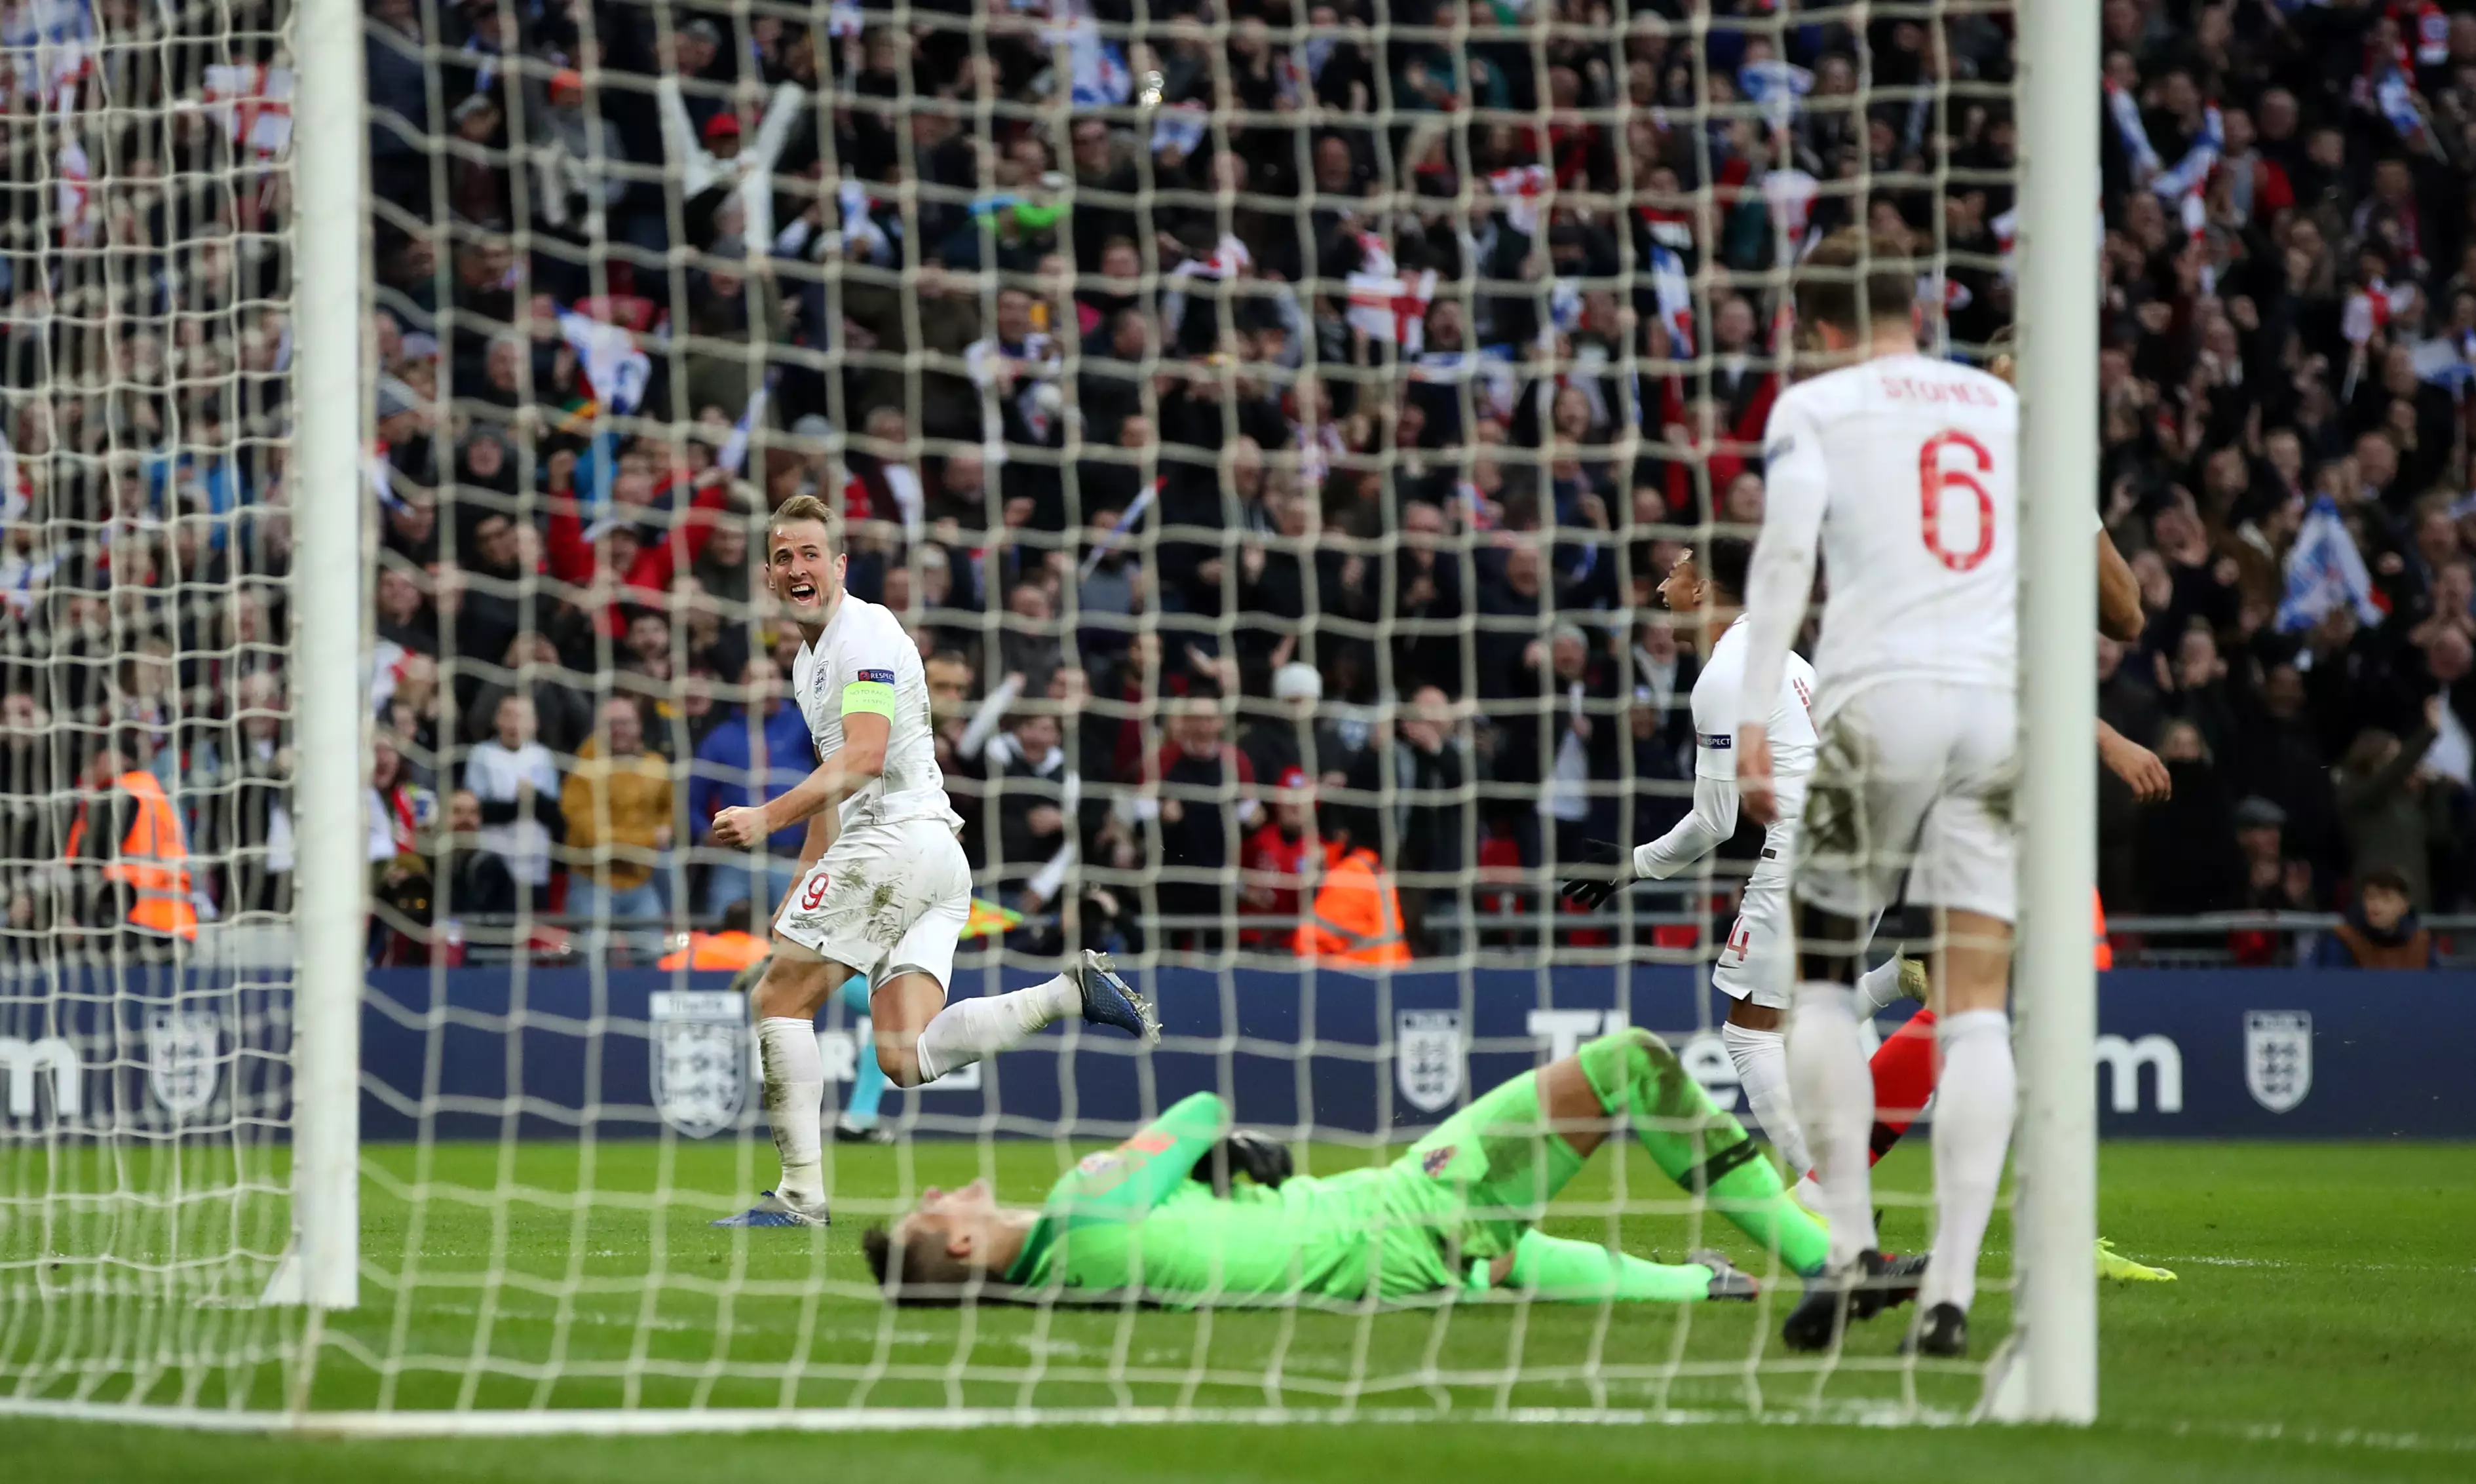 Harry Kane's goal turned things around for England and sent them to Portugal. Image: PA Images